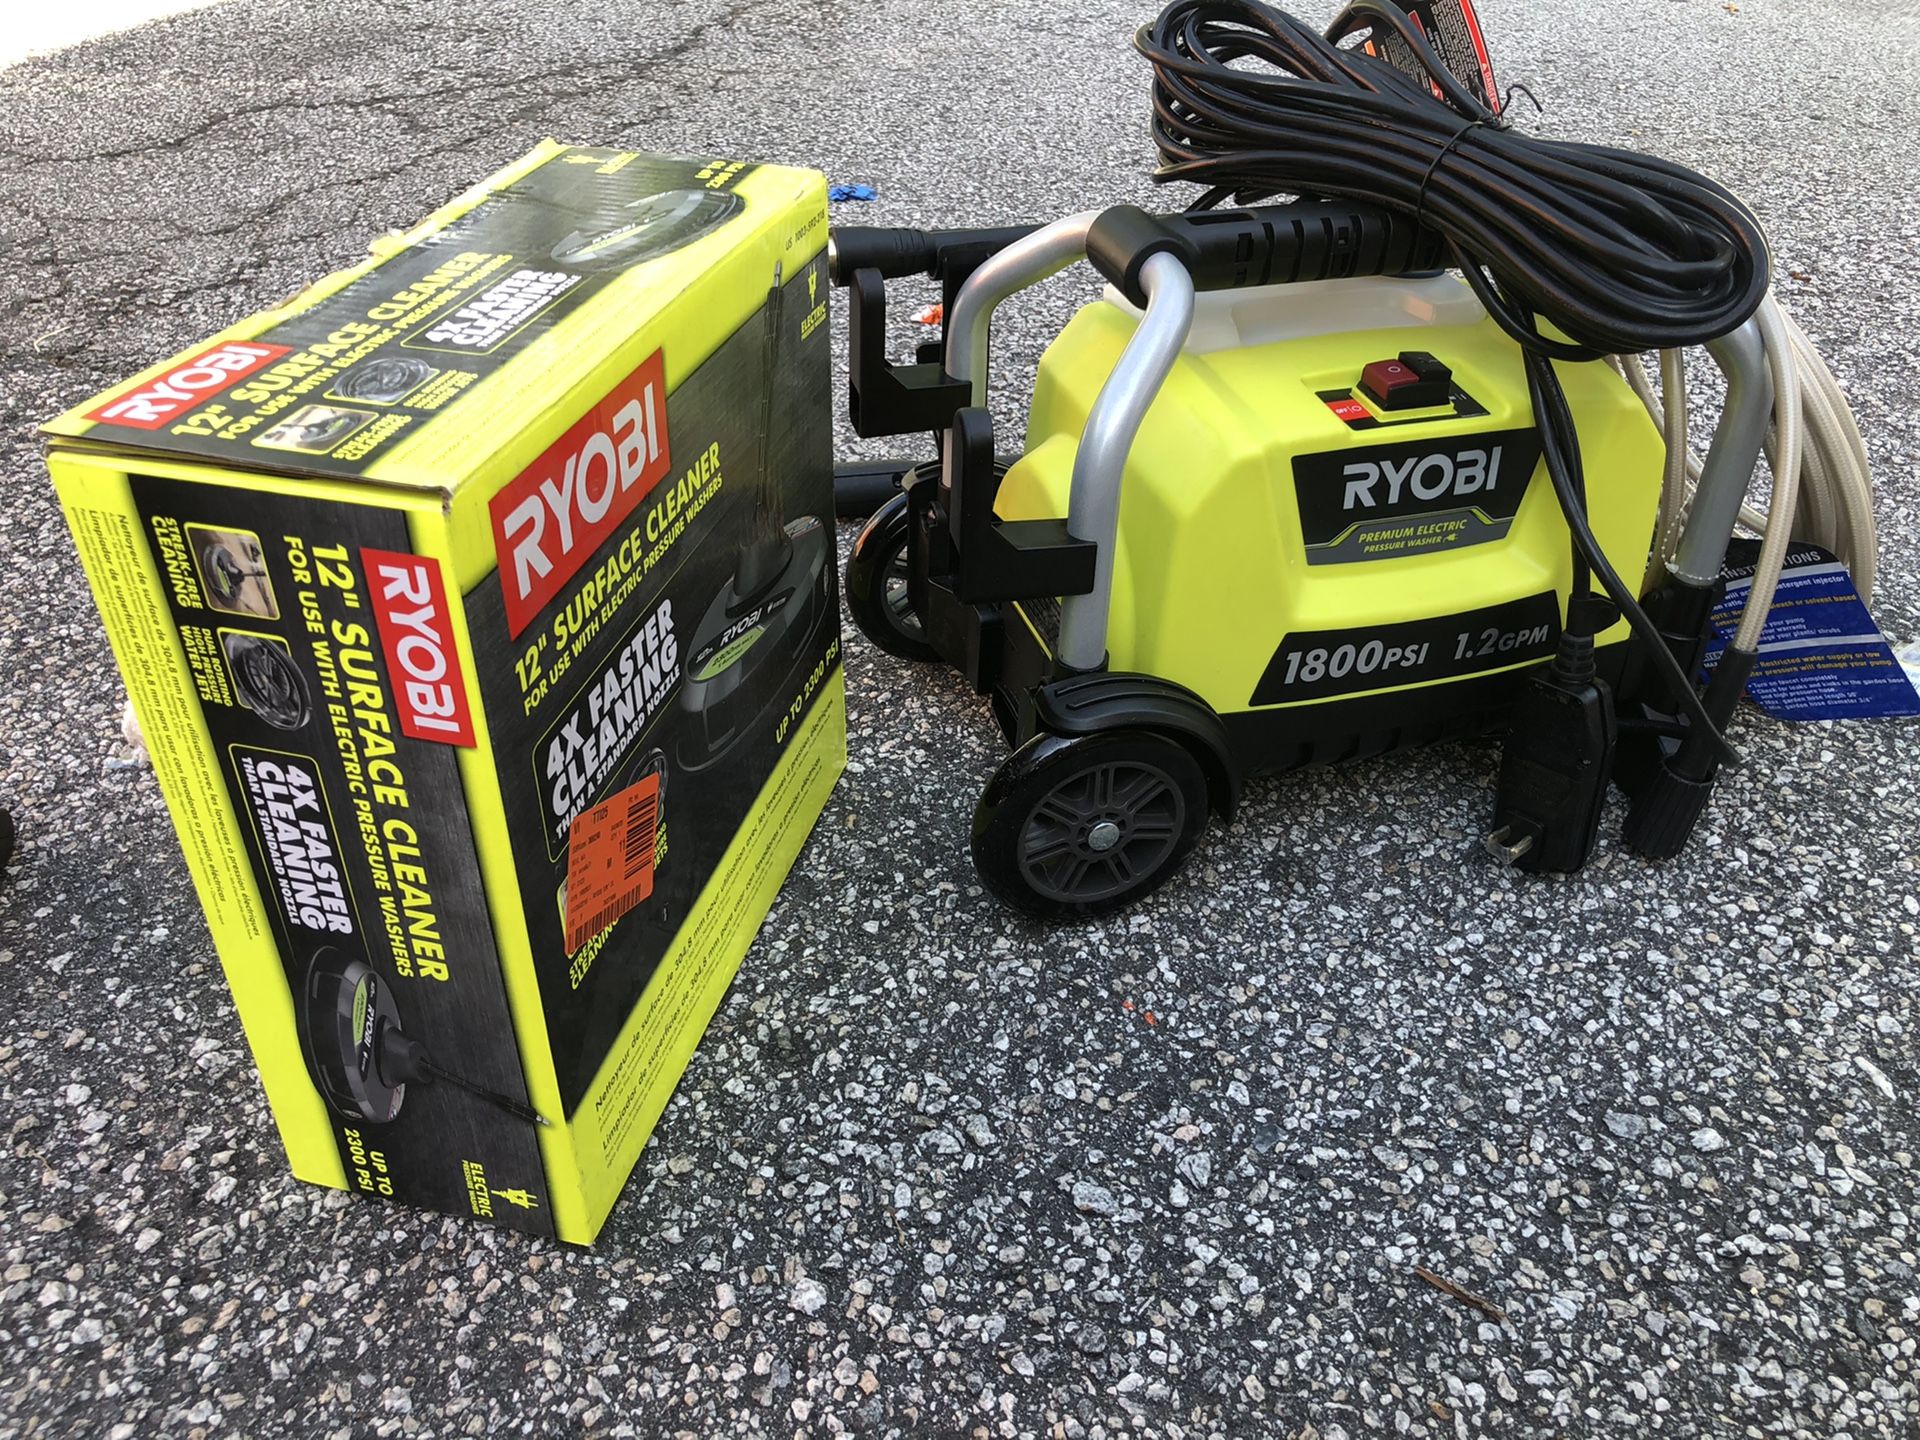 Pressure washer with surface cleaner combo